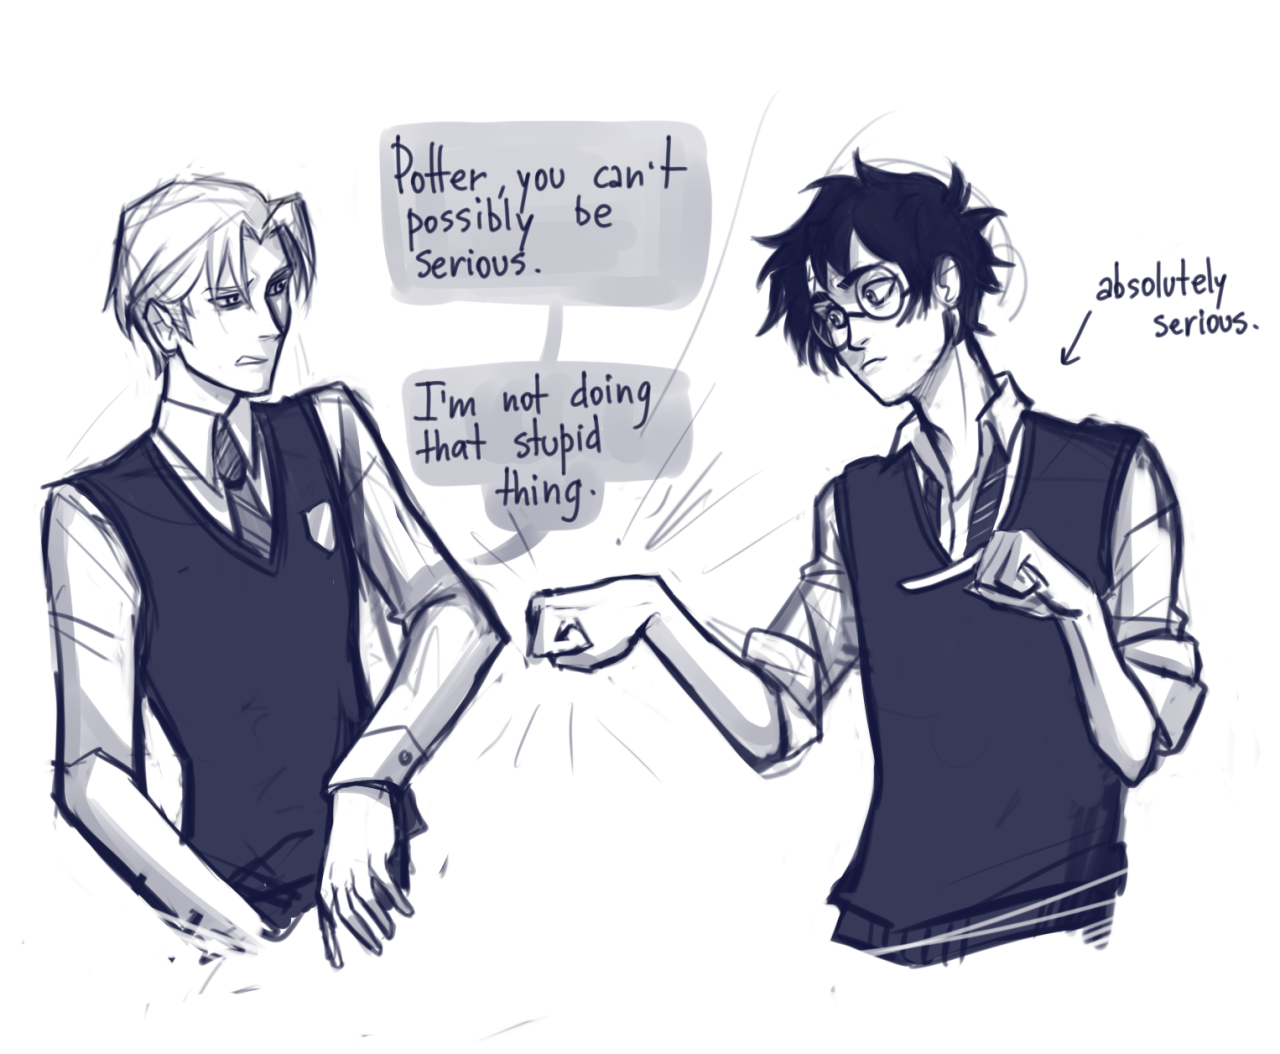 viria:  someone said I should draw some Harry and Draco, but since I don’t exactly